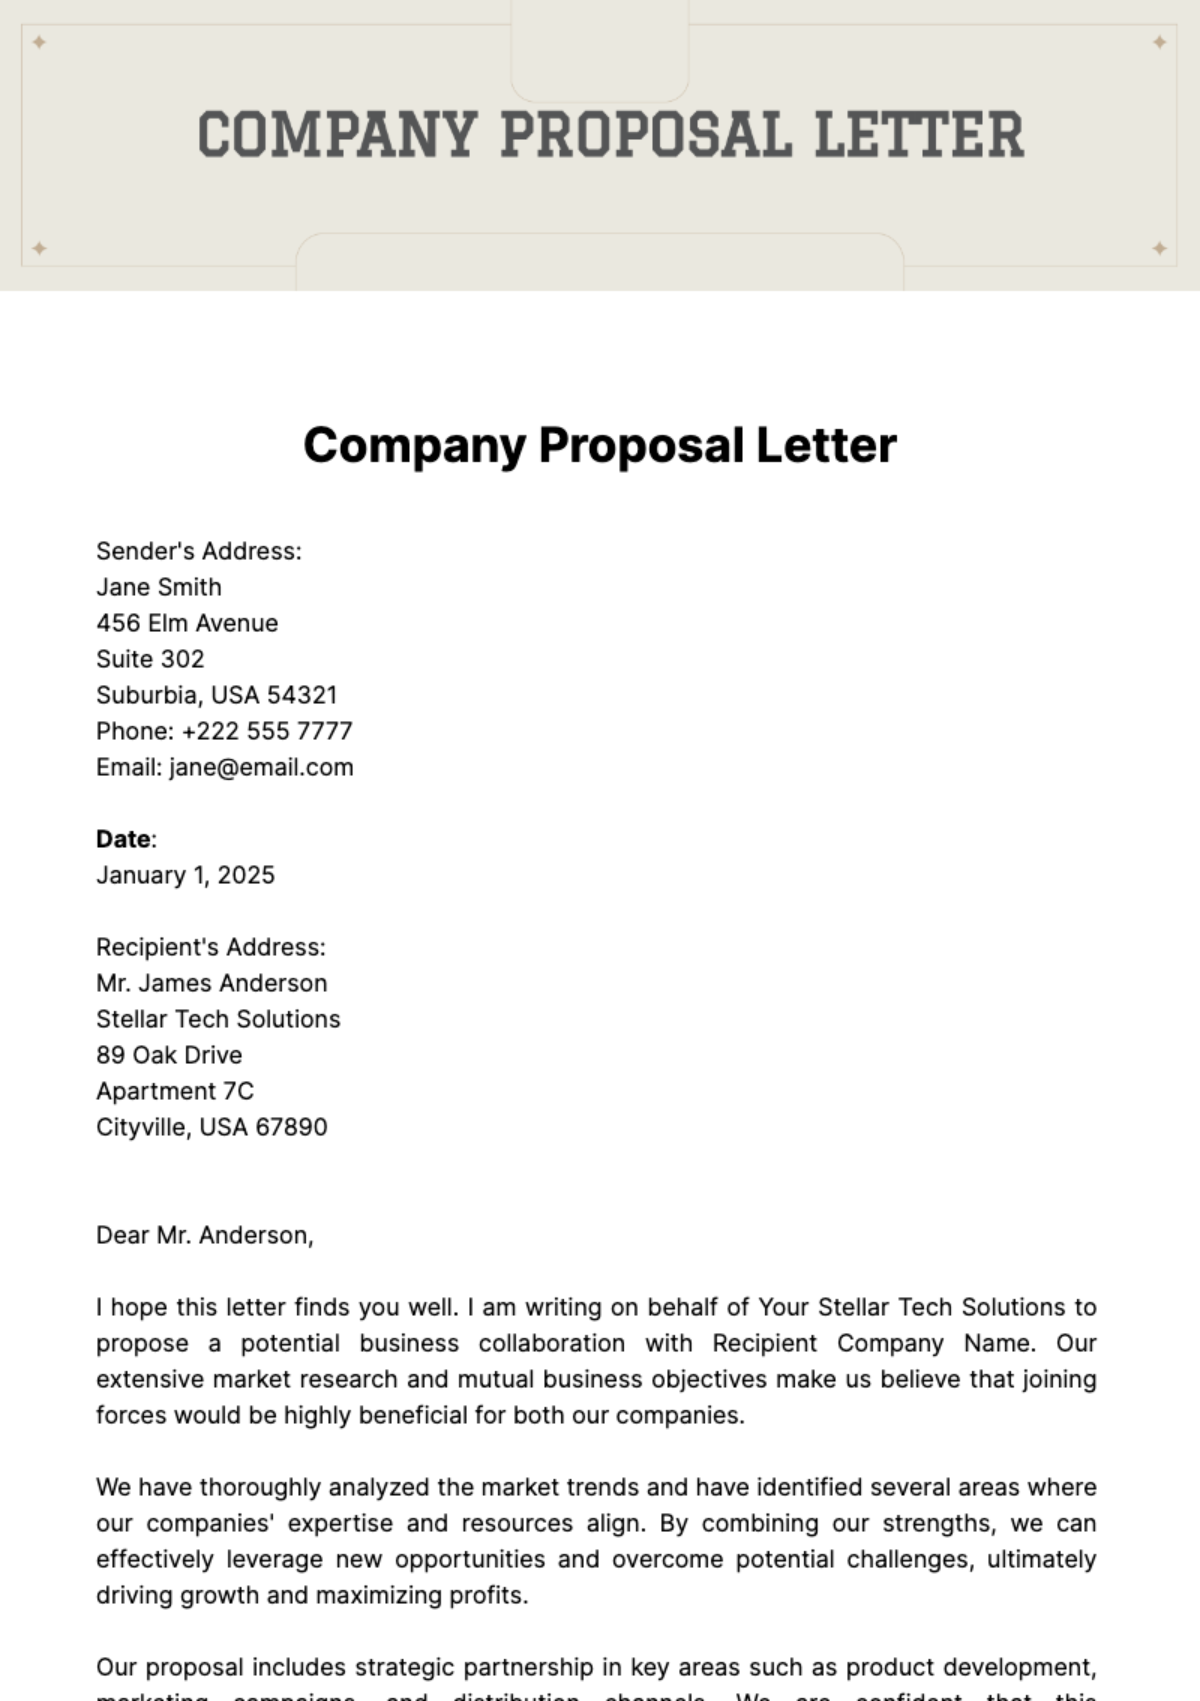 Free Company Proposal Letter Template